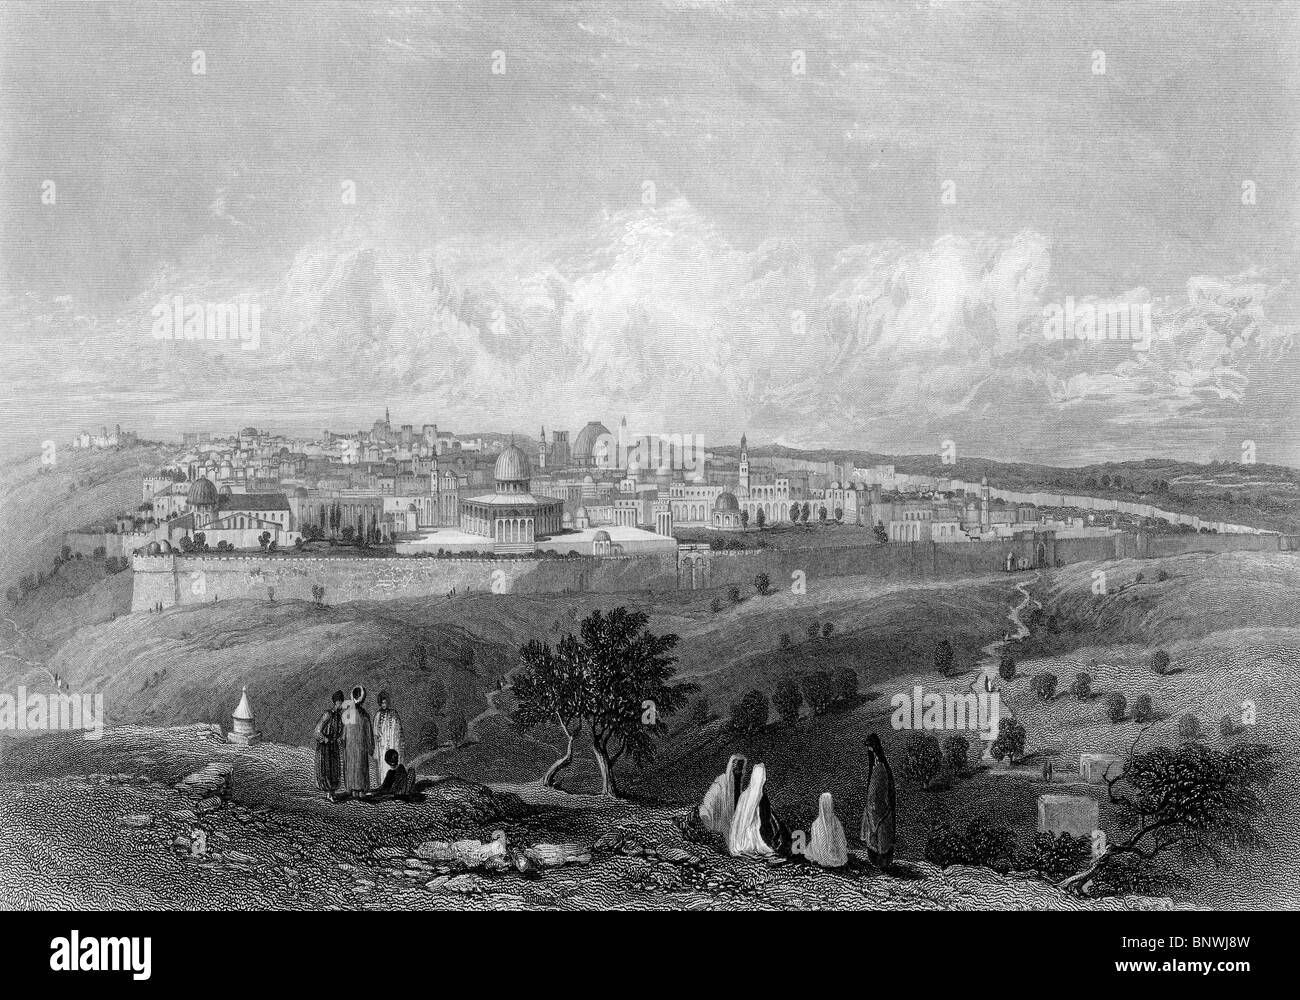 City of Jerusalem viewed from top of Mount of Olives in biblical times, Stock Photo